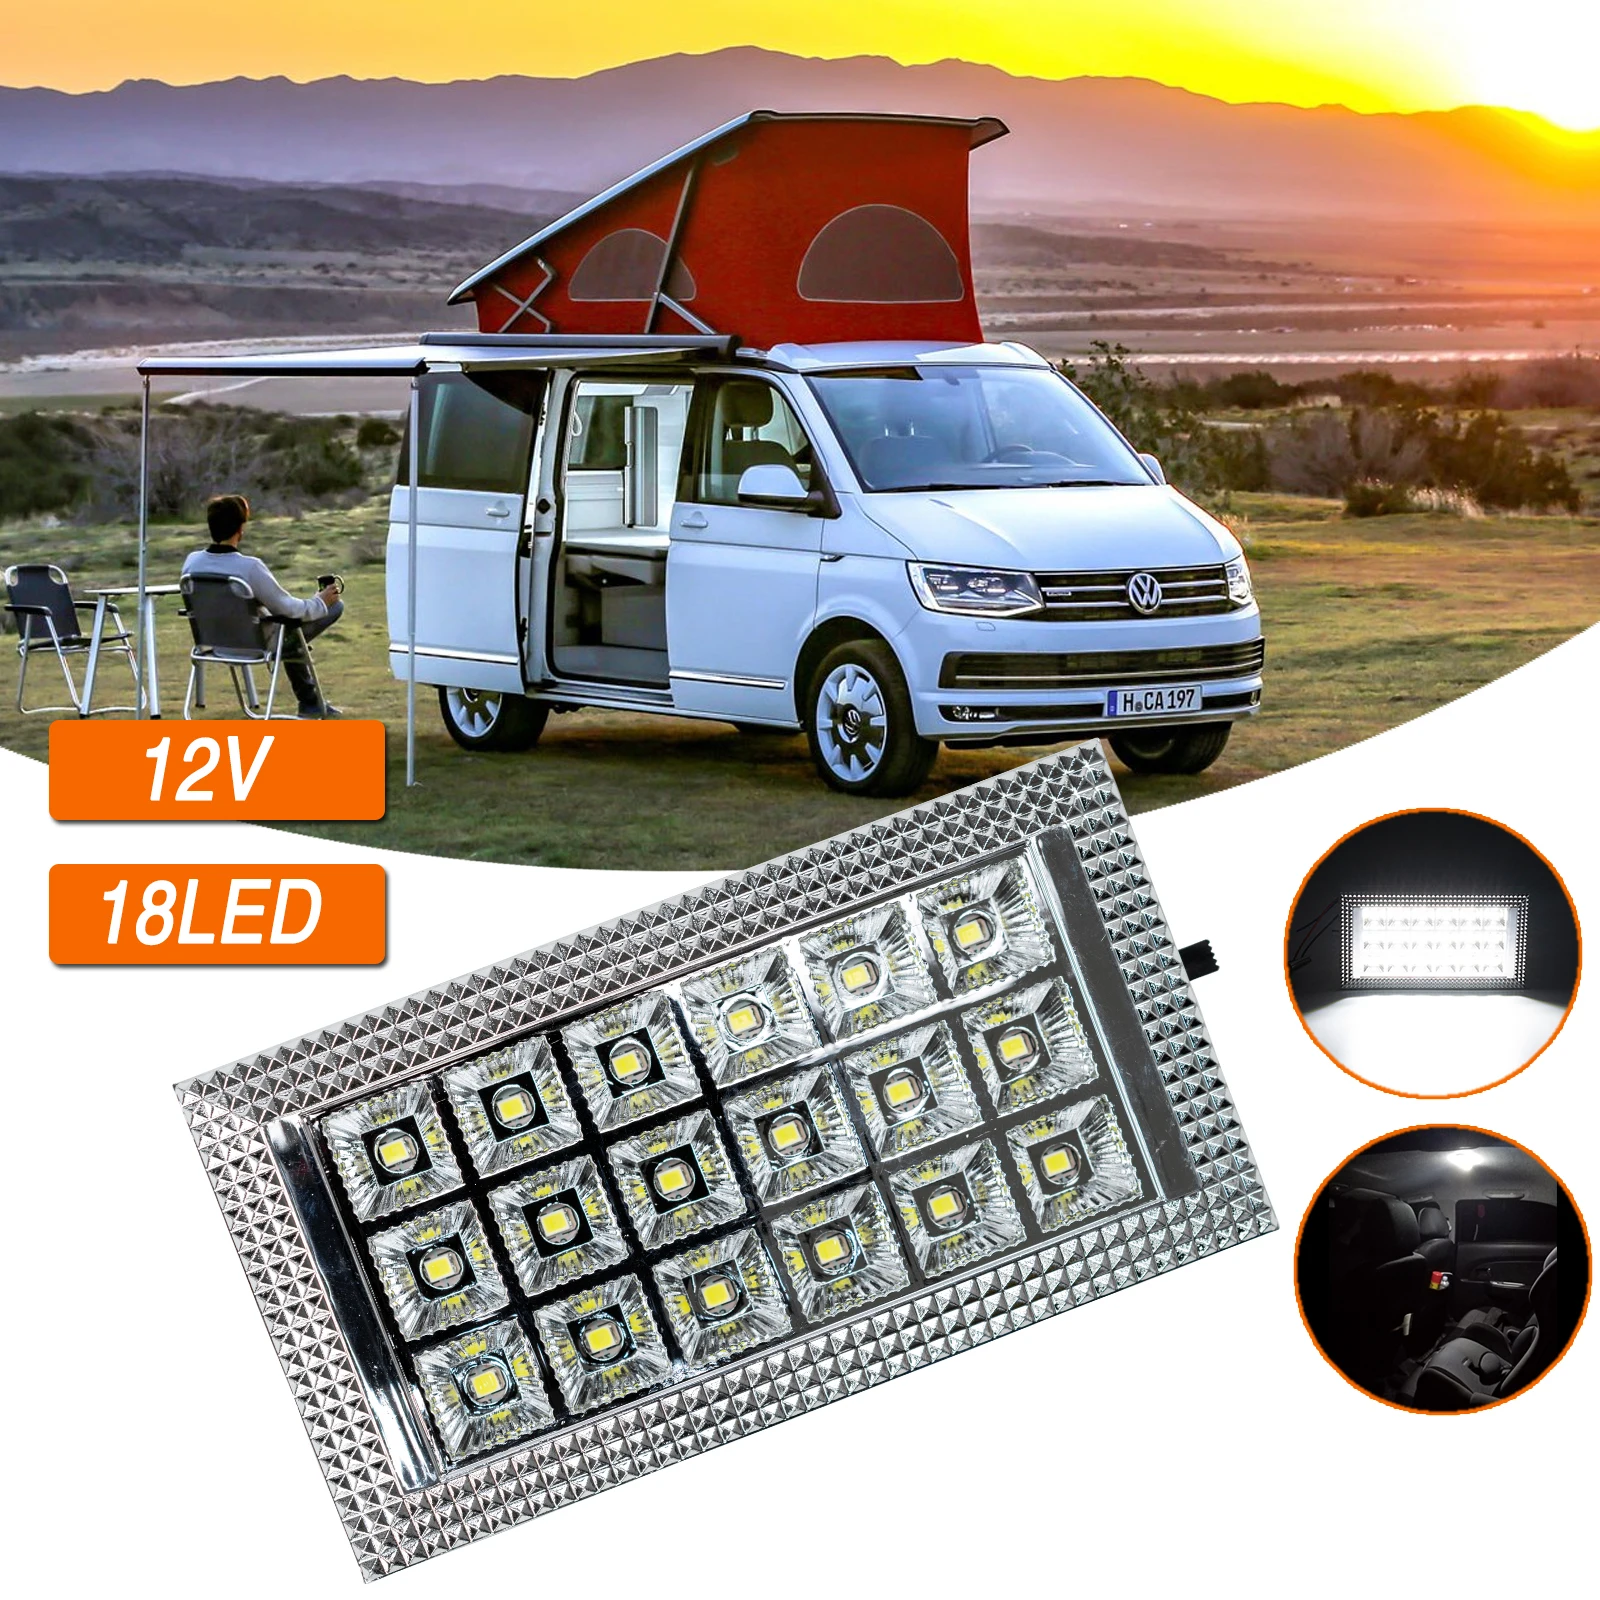 

White Auto Roof Dome Light Ceiling Reading Interior Cabin LED With Switch Blinker Pickup Truck Caravan Boat Motorhome Trailer RV